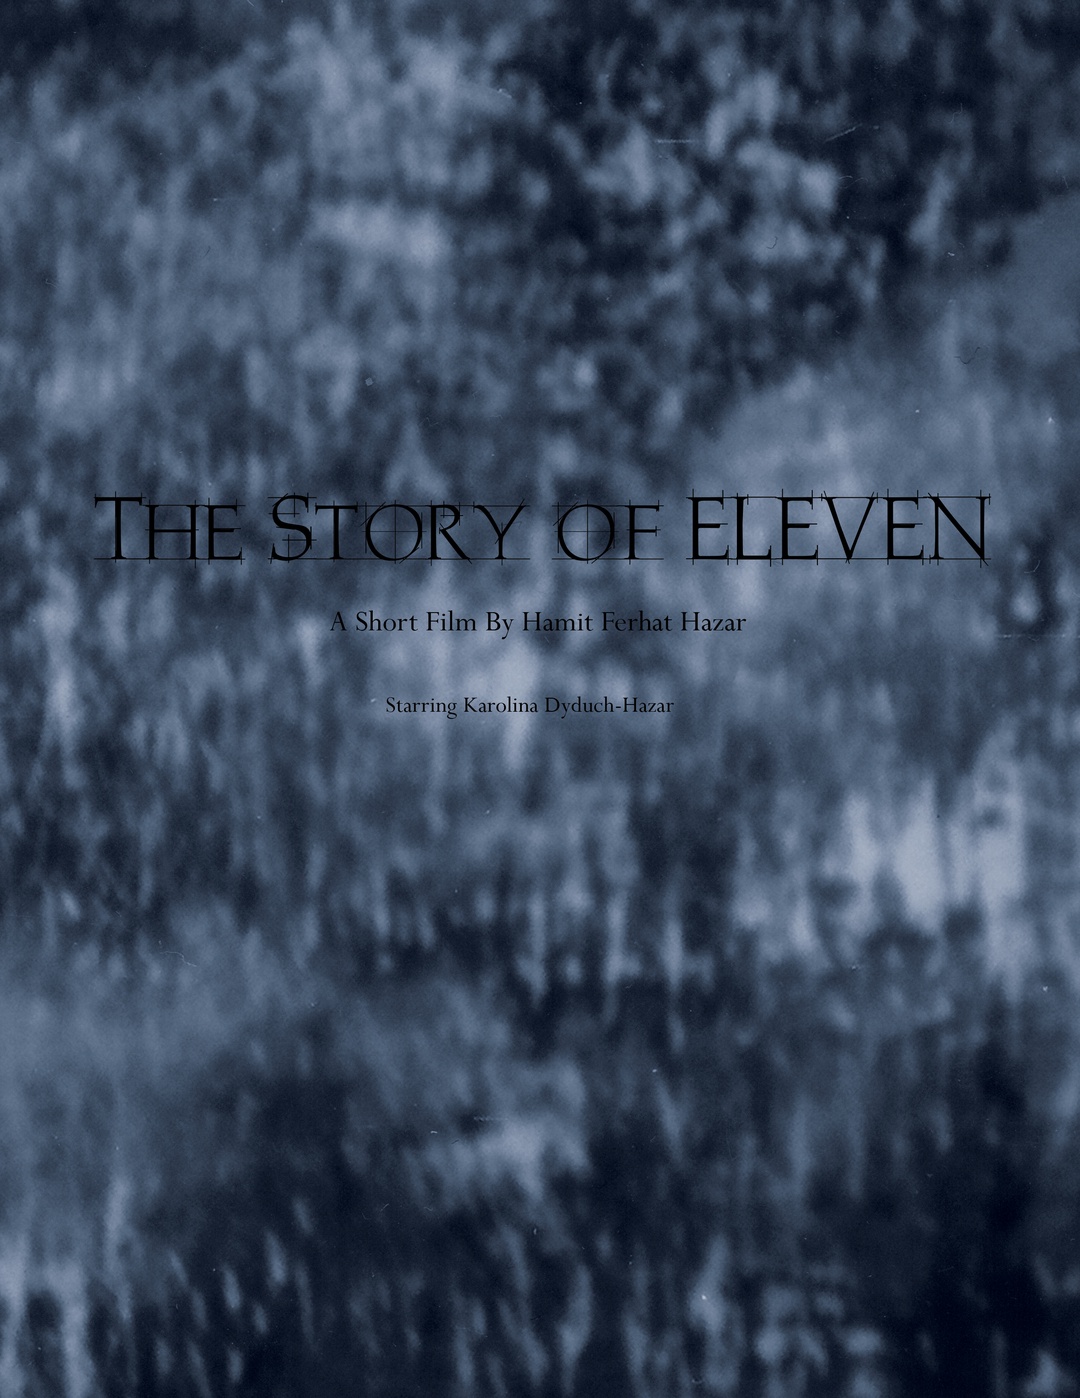 The Story of Eleven